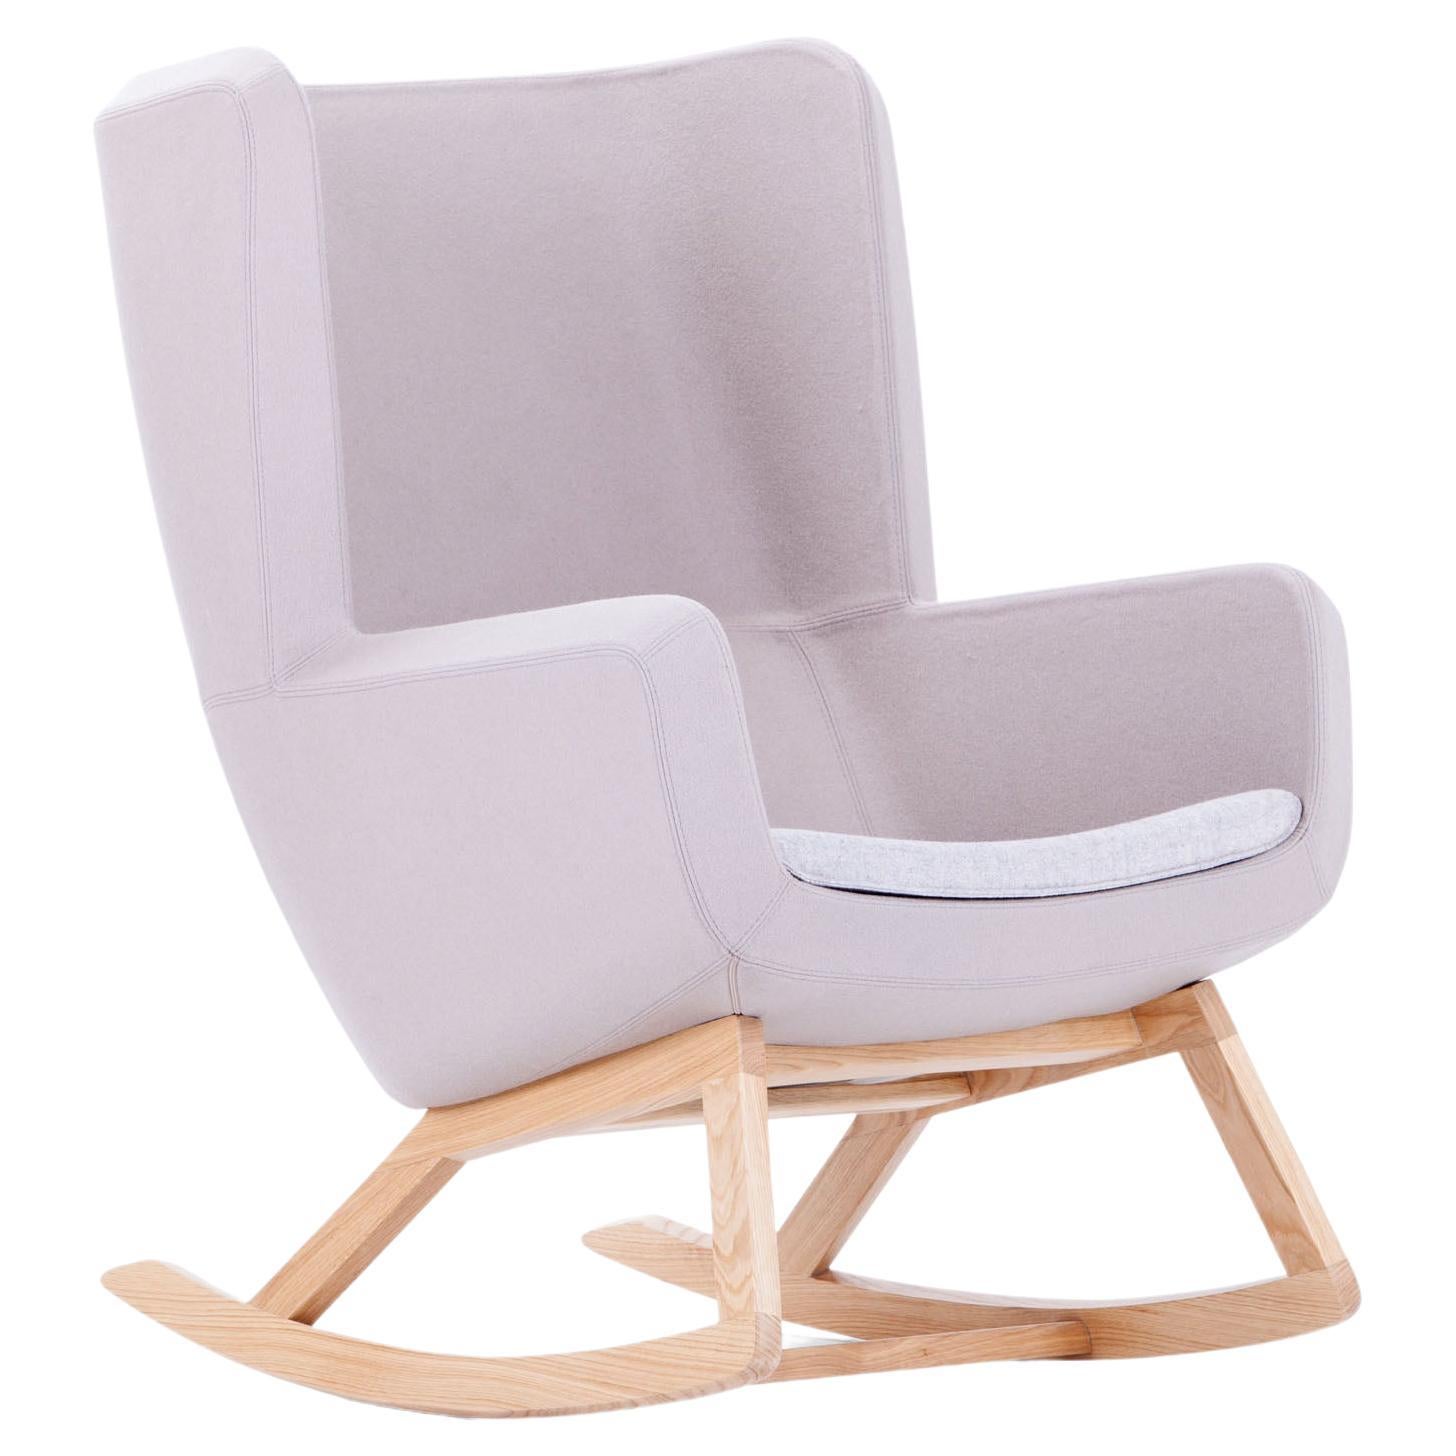 21st Century Modern High Backrest Wooden Rocking Base Arca Made in Italy For Sale